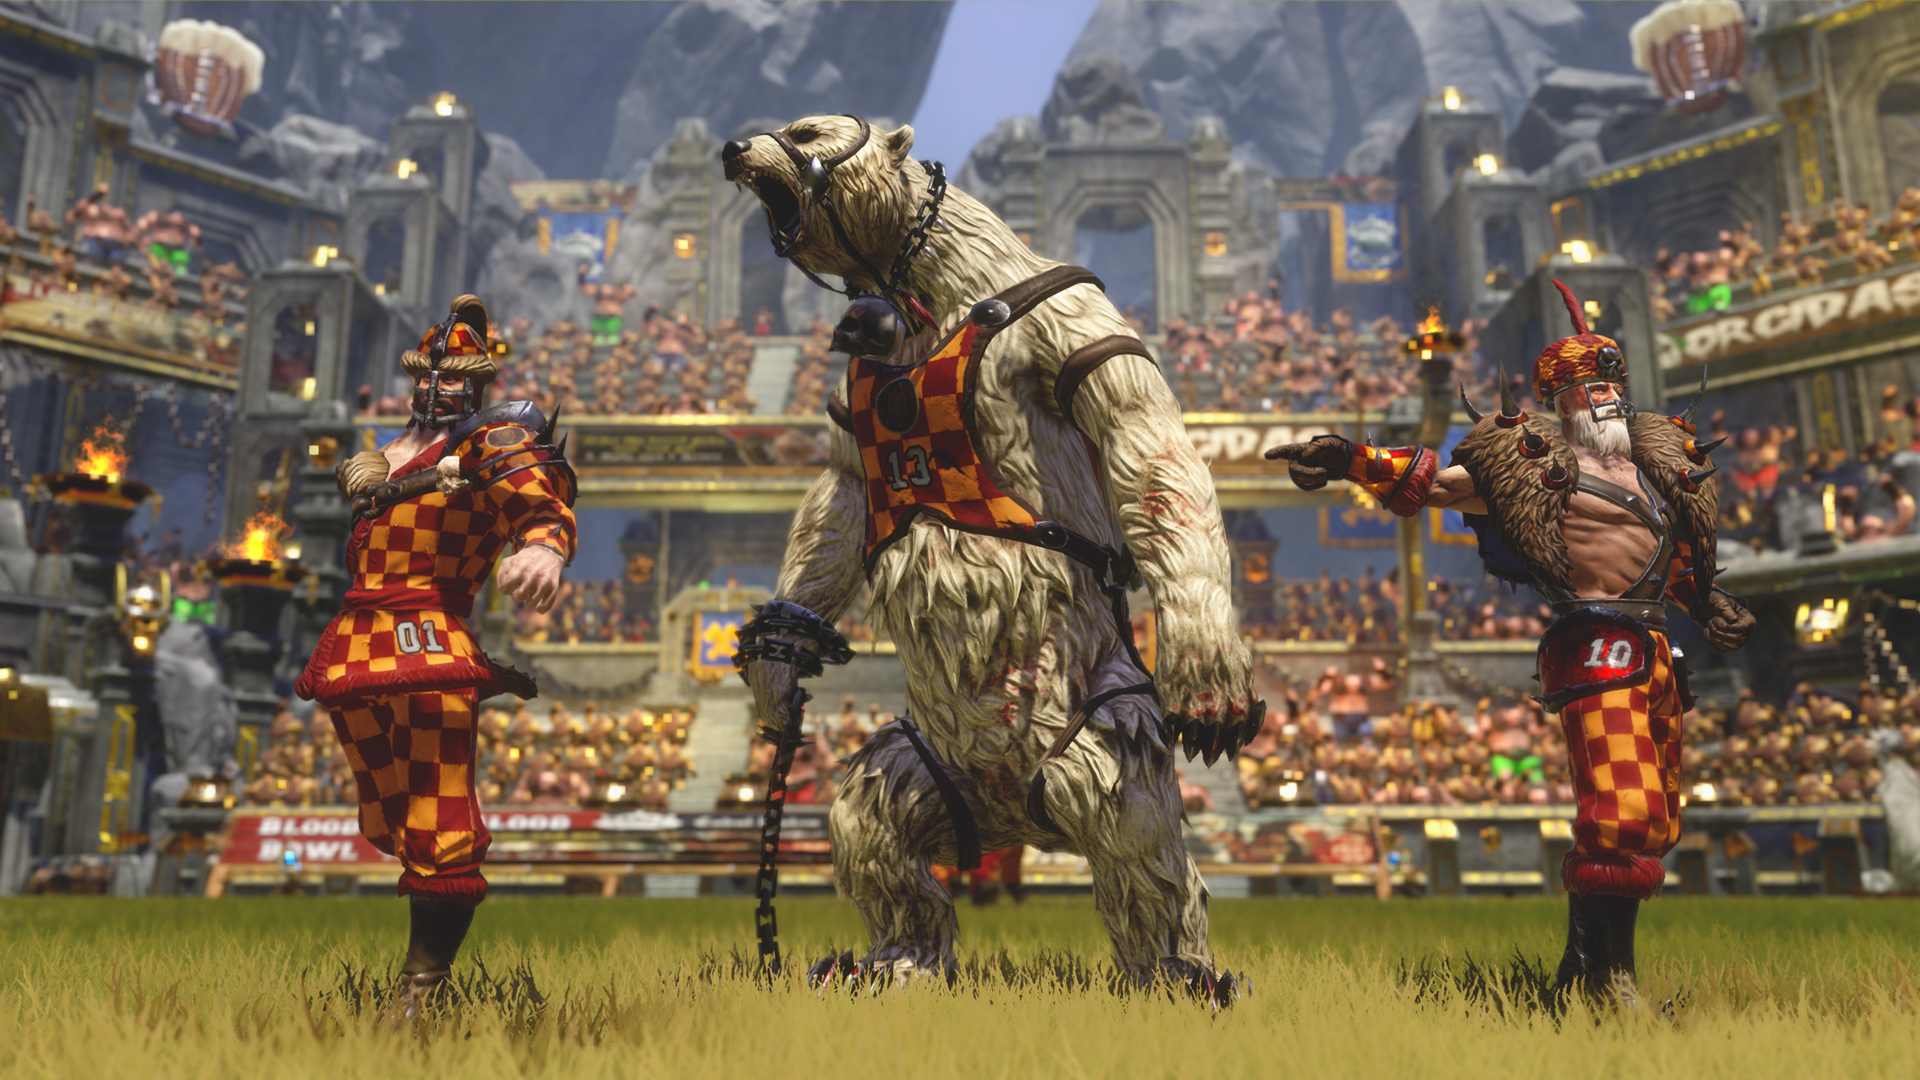 Blood Bowl 2 - Official Expansion Featured Screenshot #1